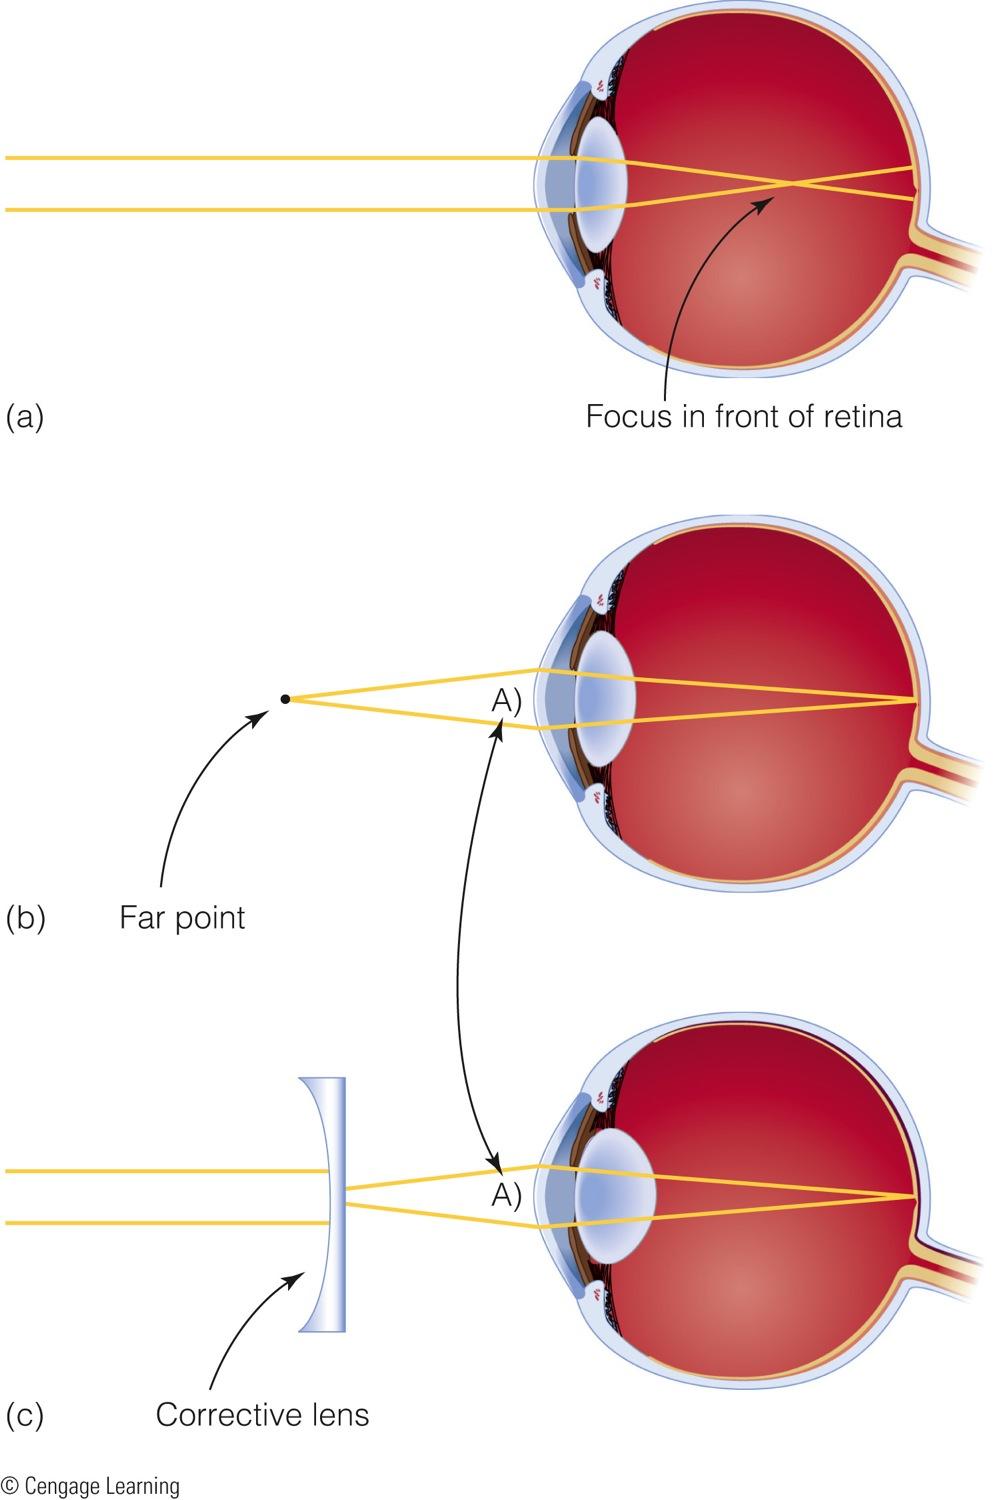 Myopia or nearsightedness - Inability to see distant objects clearly Image is focused in front of retina images of faraway objects are not focused sharply, so objects look blurred.